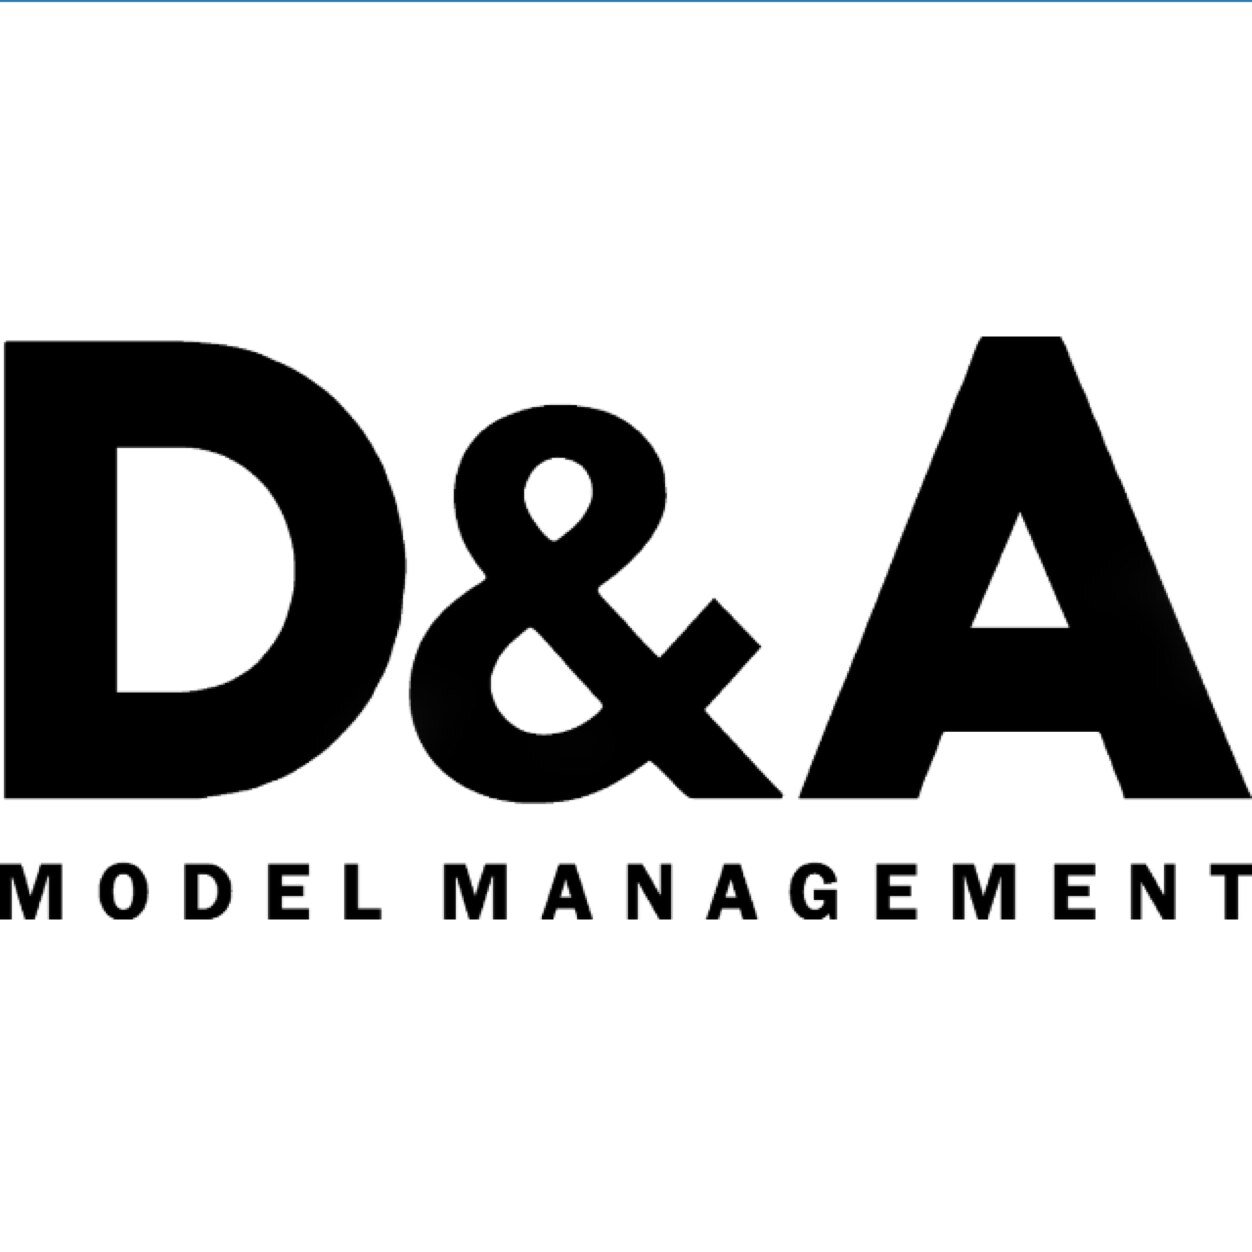 The leading model agency in South Africa #damodels